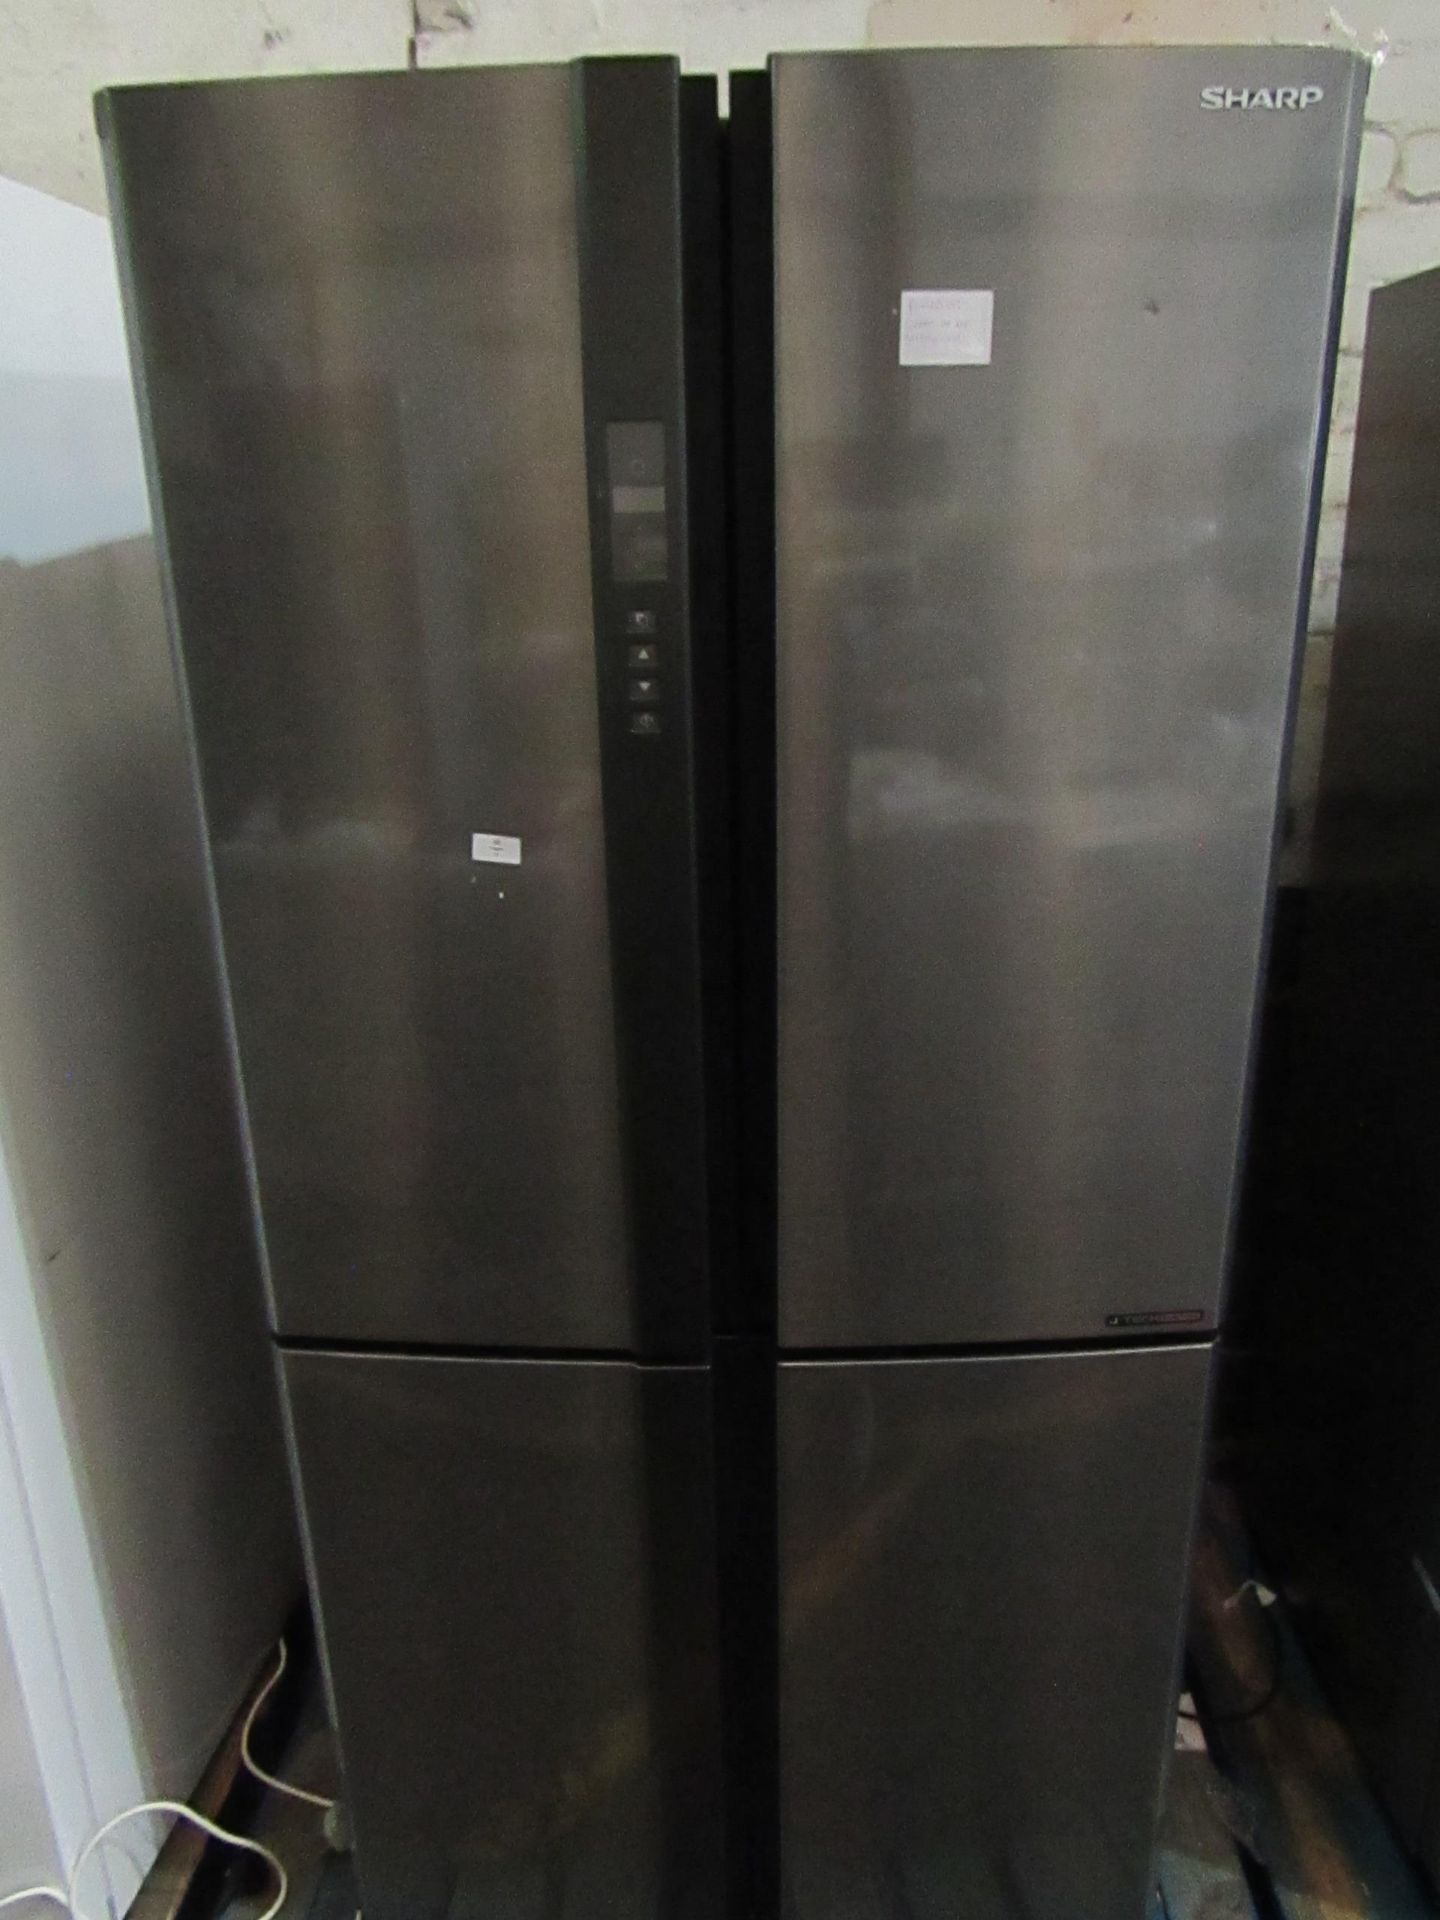 Sharp 4 door american fridge freezer, getting cold in both compartments when plugged in, has a